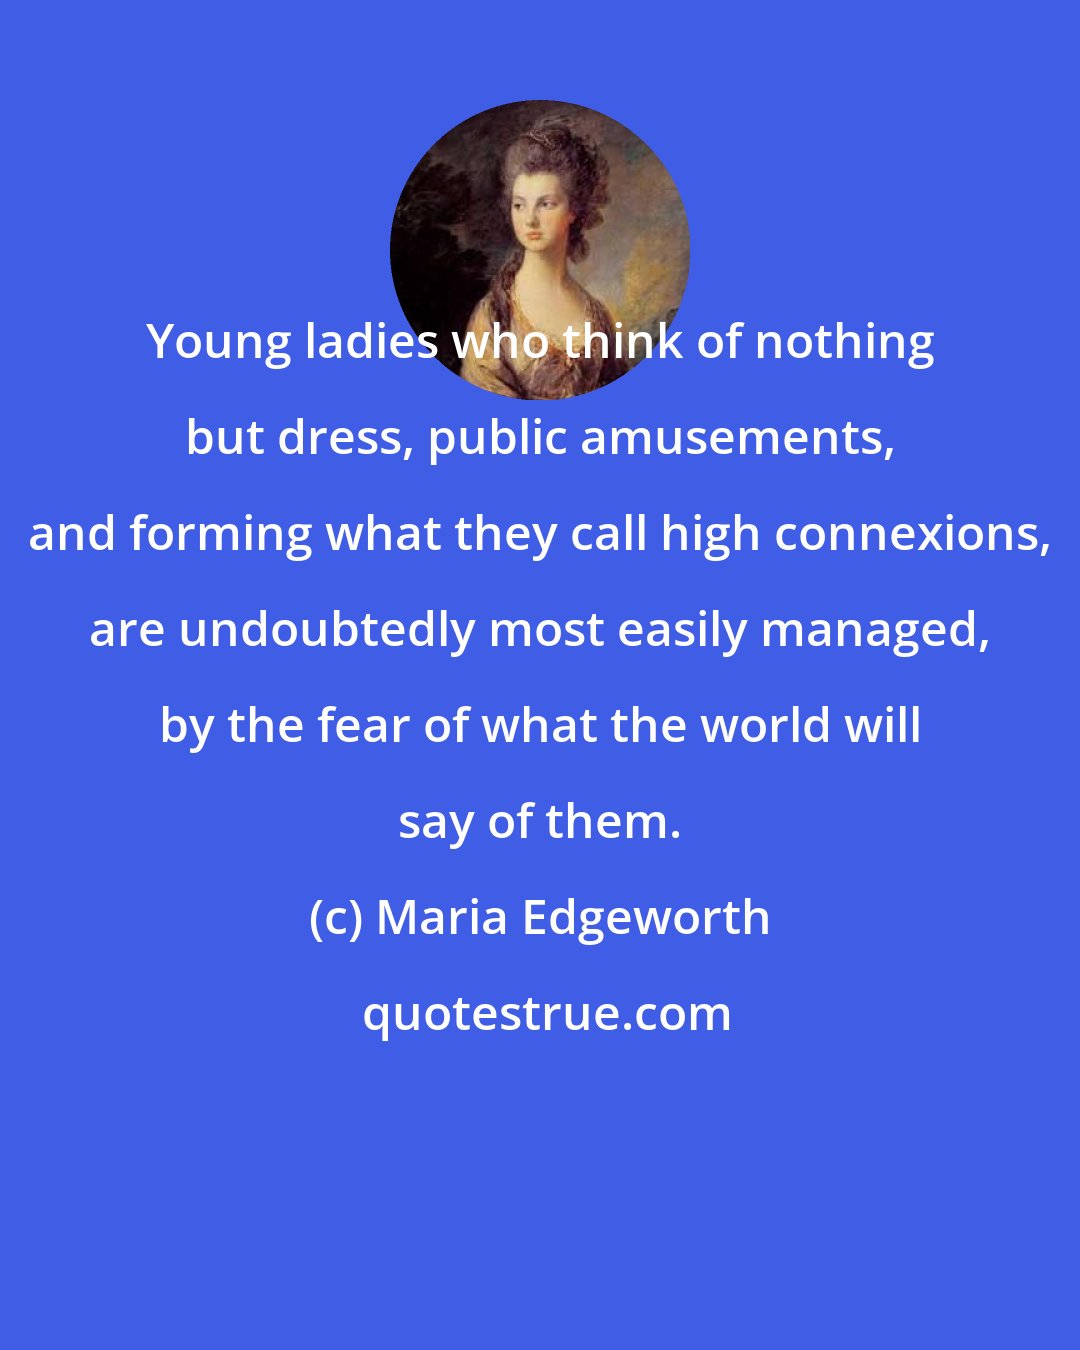 Maria Edgeworth: Young ladies who think of nothing but dress, public amusements, and forming what they call high connexions, are undoubtedly most easily managed, by the fear of what the world will say of them.